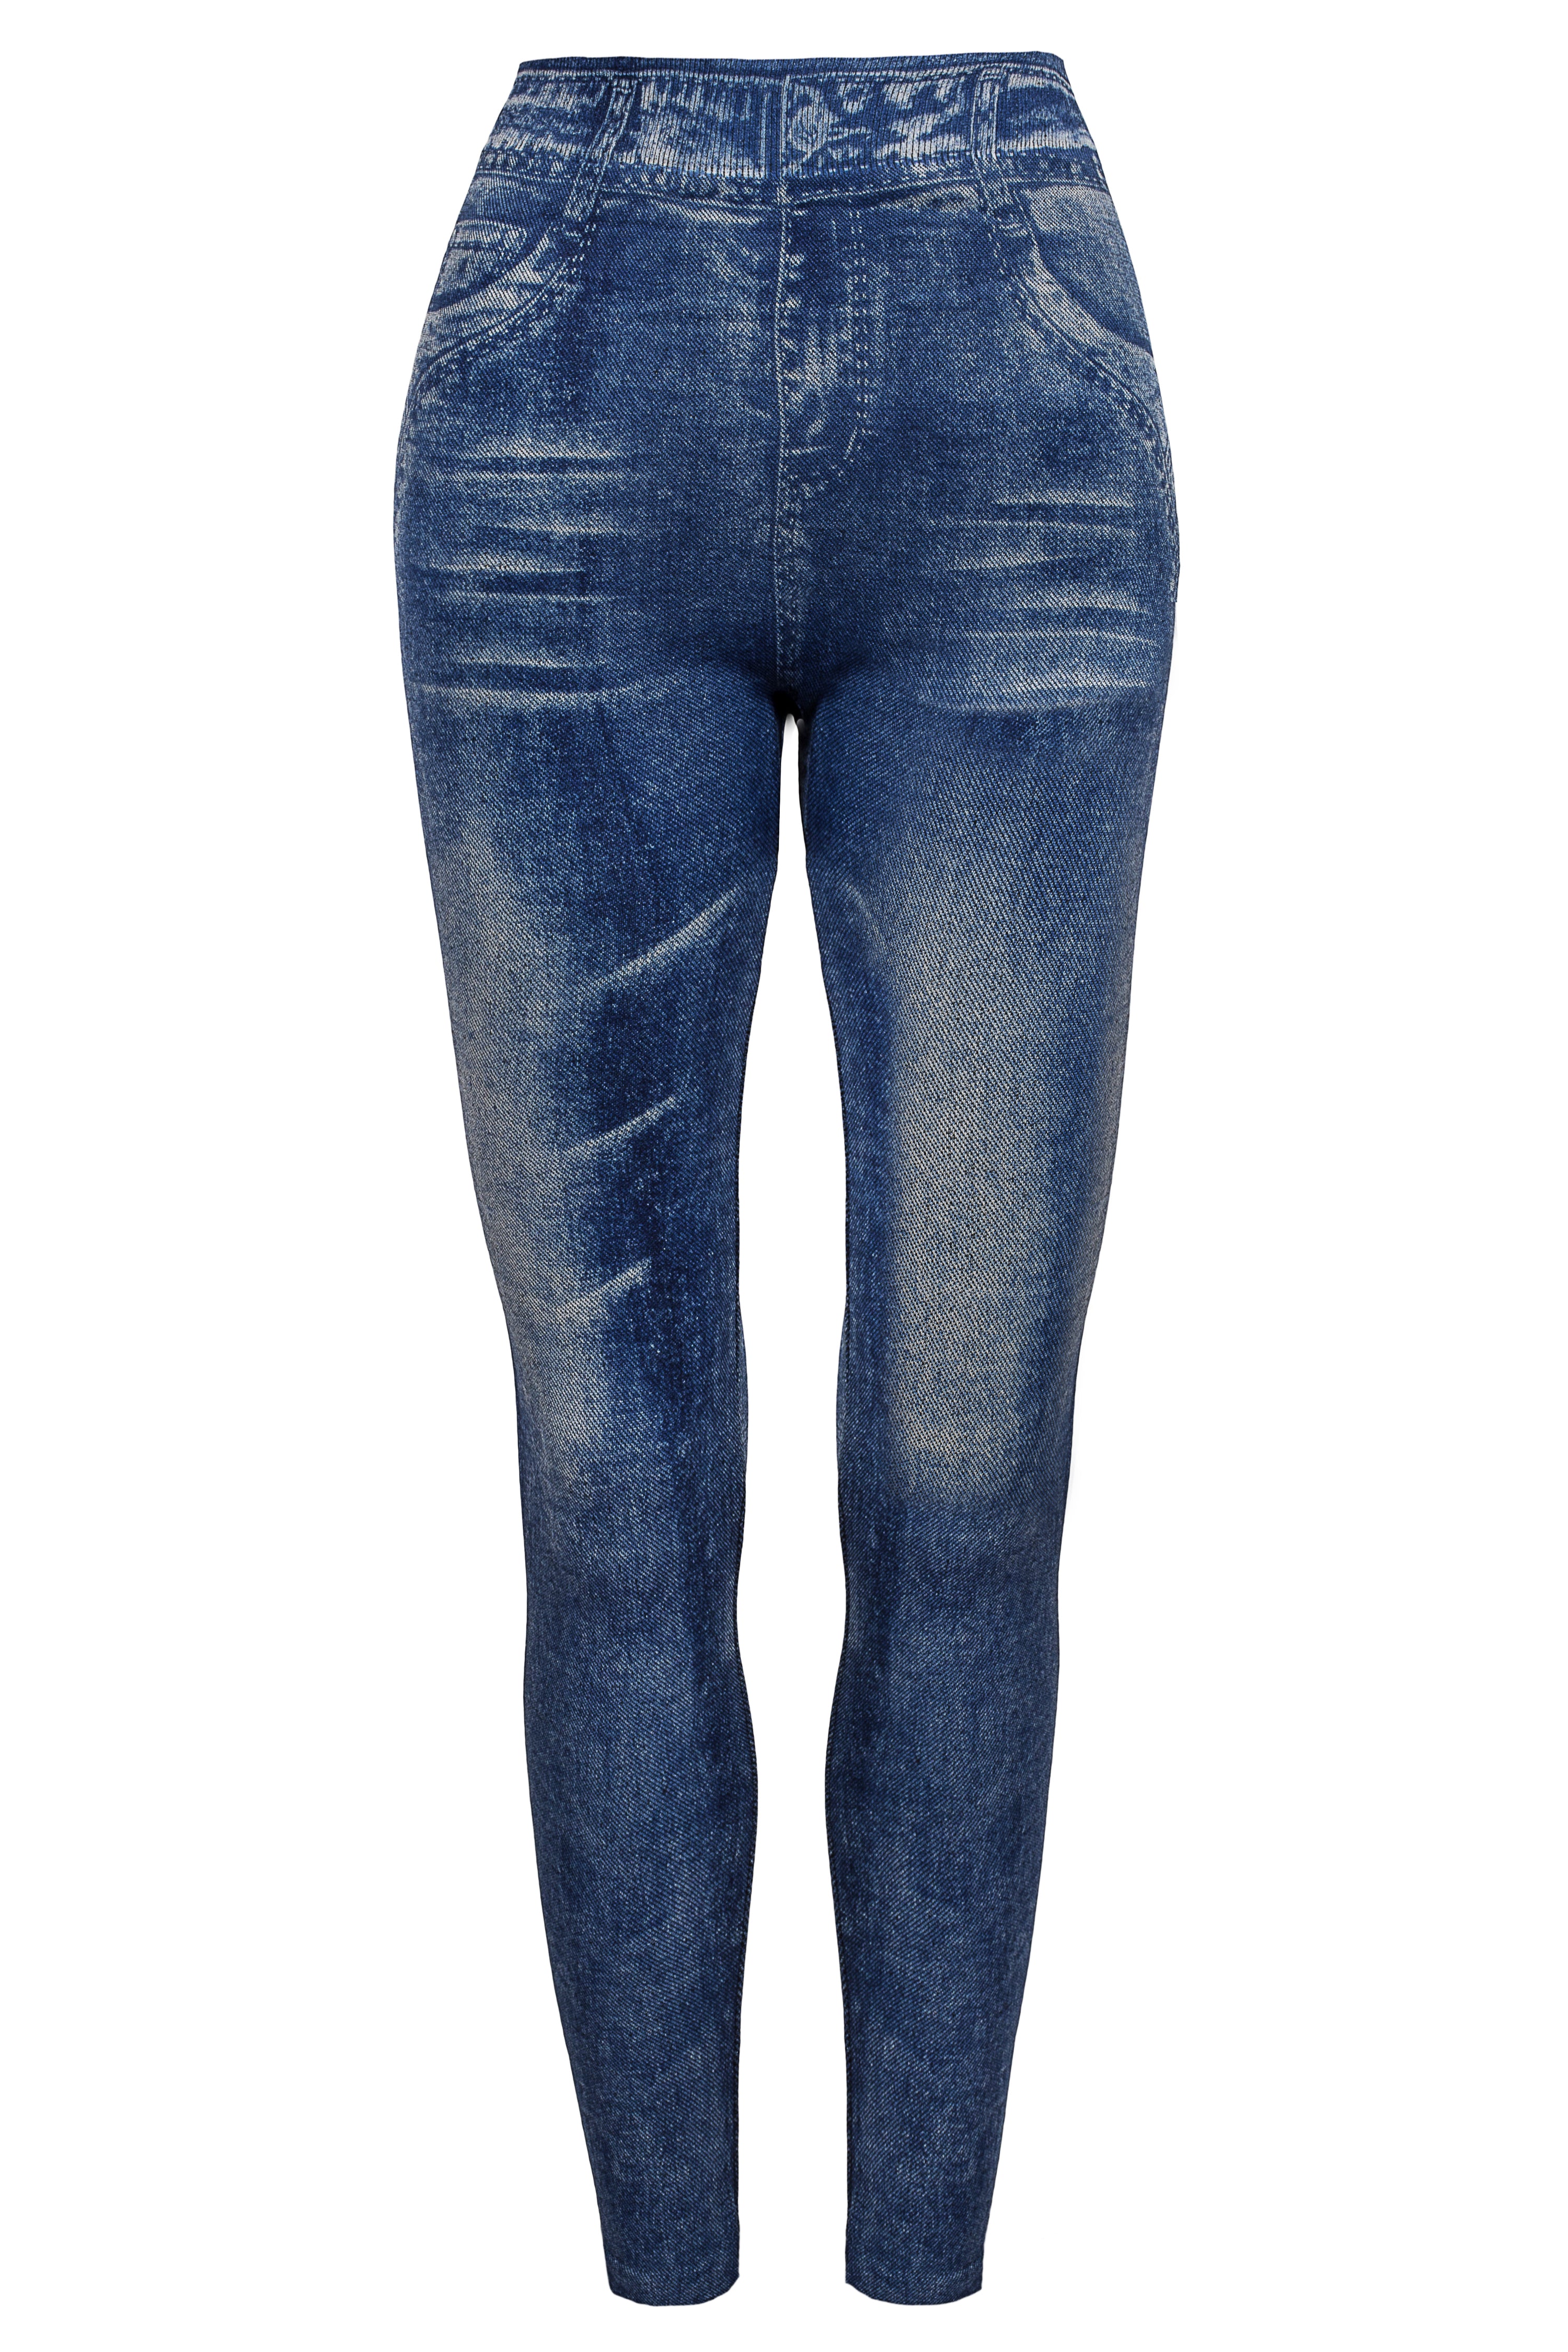 Fleece Lined Jegging - Buy Fashion Wholesale in The UK